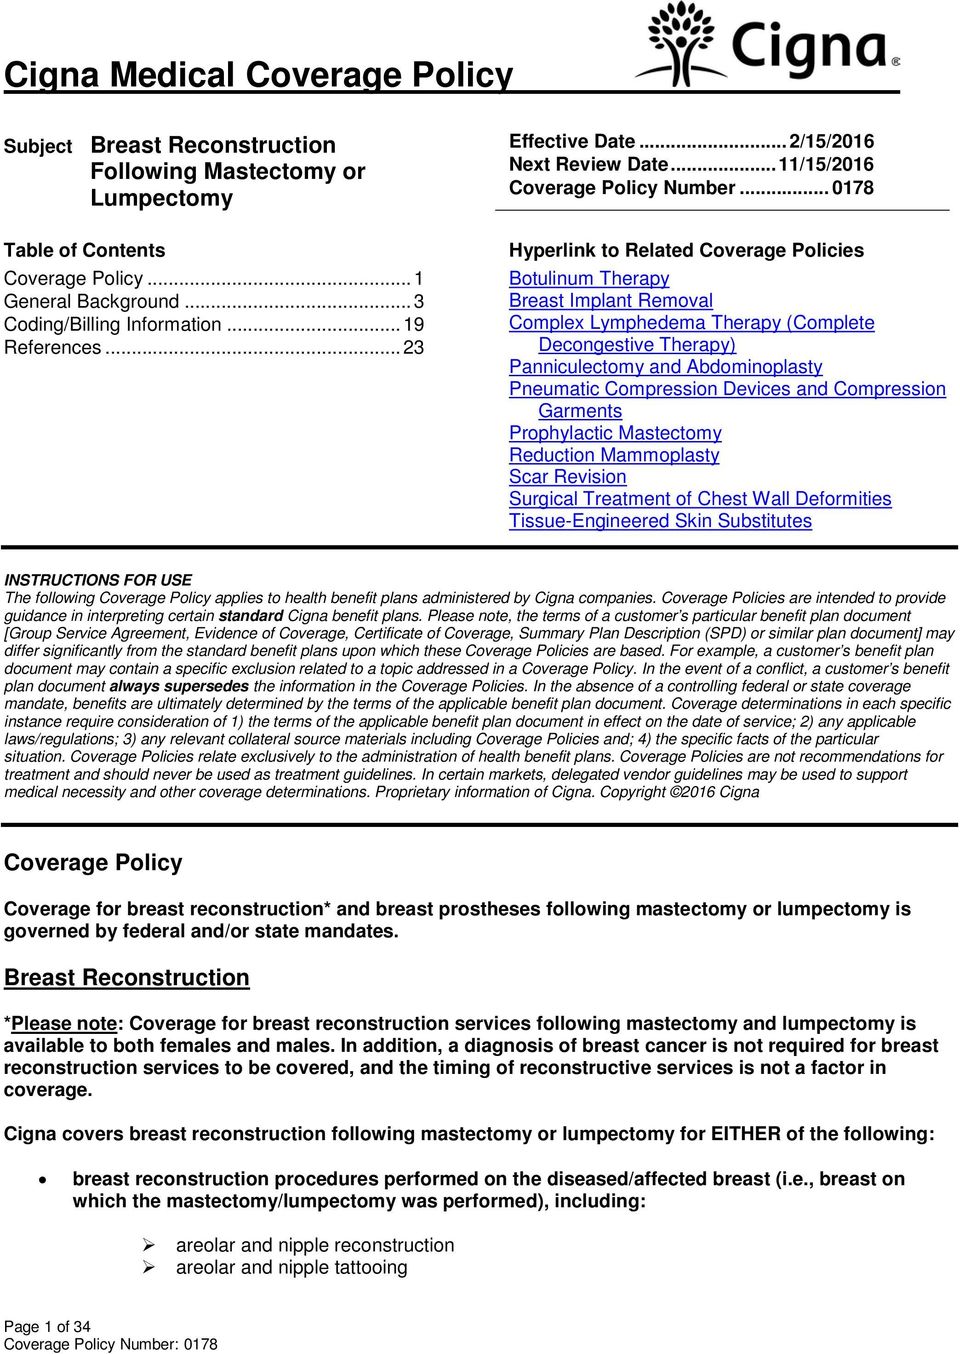 Cigna Medical Coverage Policy - Pdf Free Download